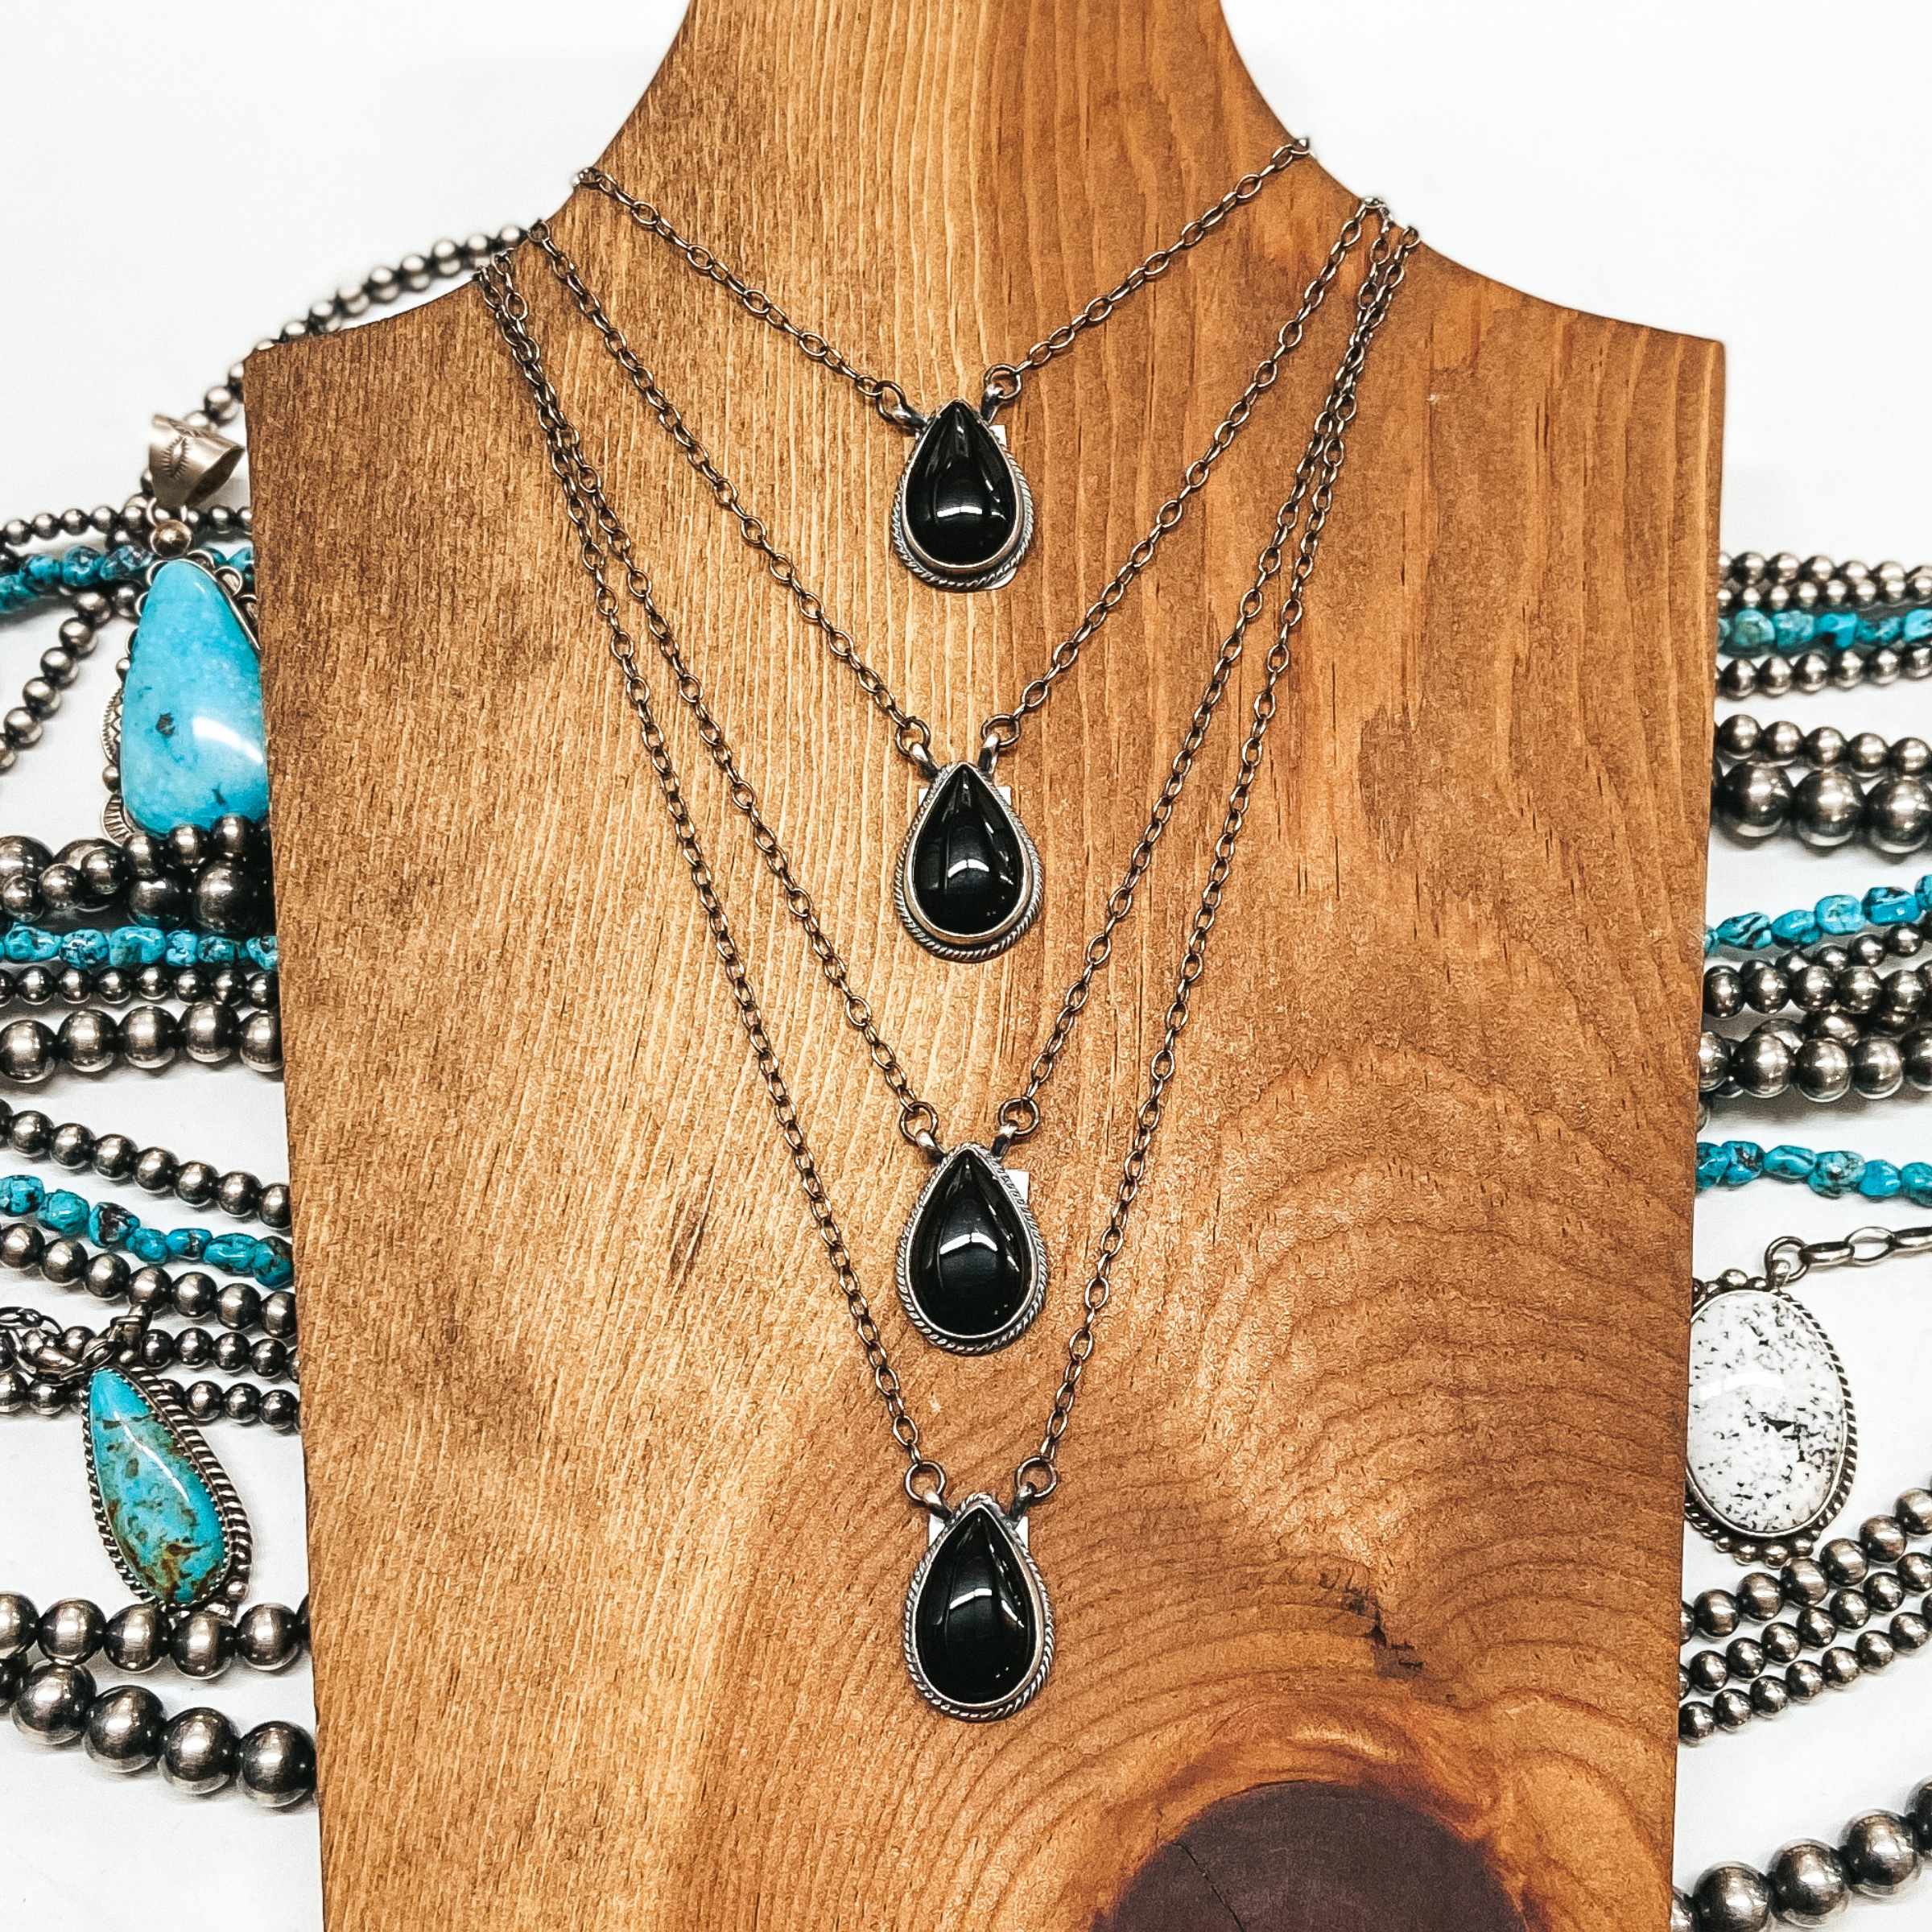 4 Sterling silver chain necklaces with black onyx teardrop pendants pictured on wooden background with sterling silver and turquoise jewelry